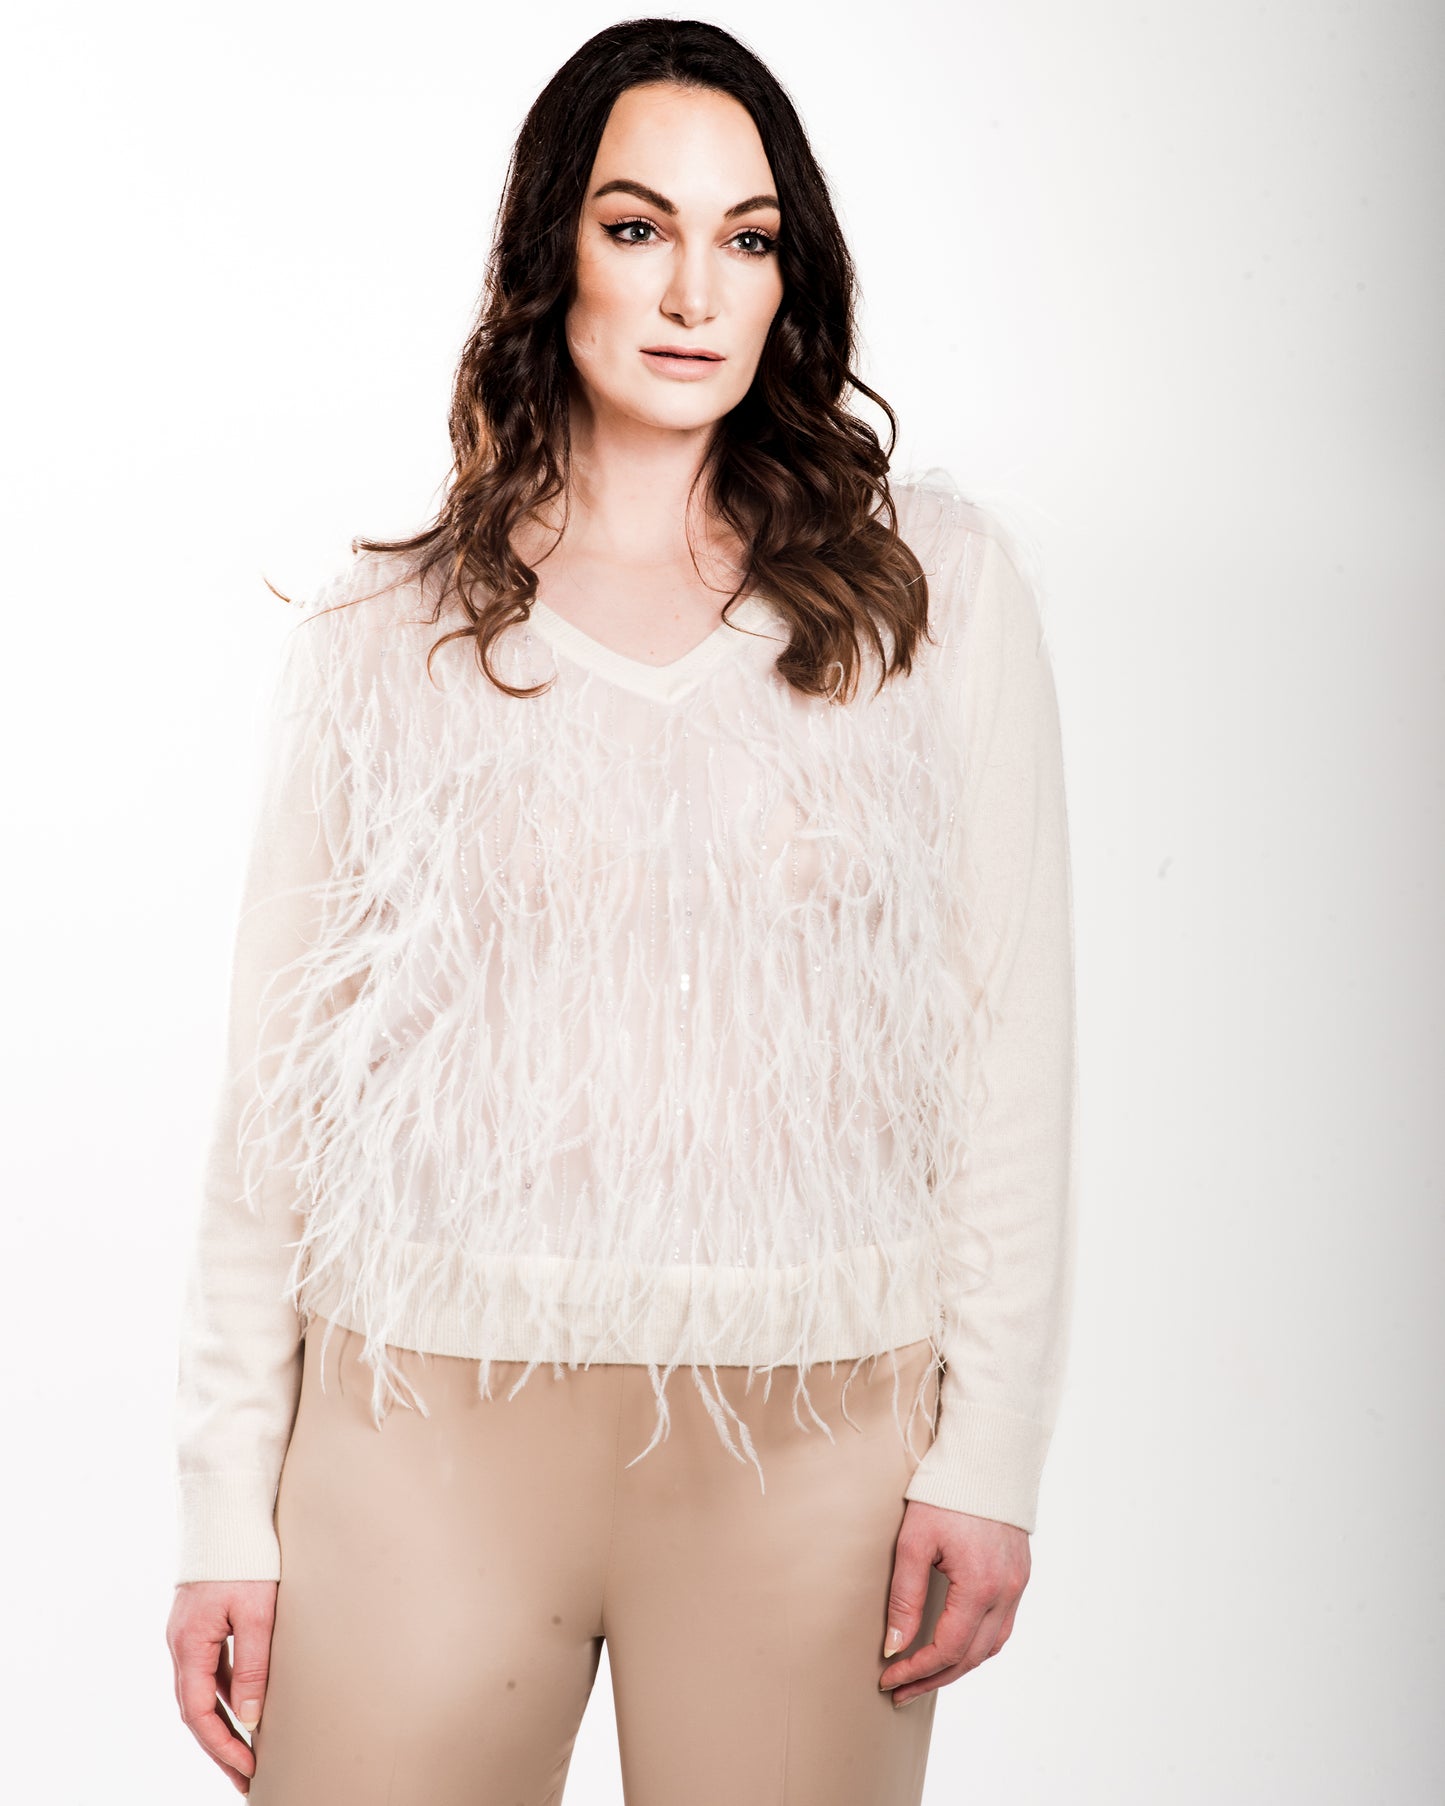 XL IVORY V-NECK LONG SLEEVE CASHMERE SWEATER WITH WHITE FEATHER AND CRYSTAL BEAD FRONT LINED WITH WHITE SILK ORGANZA